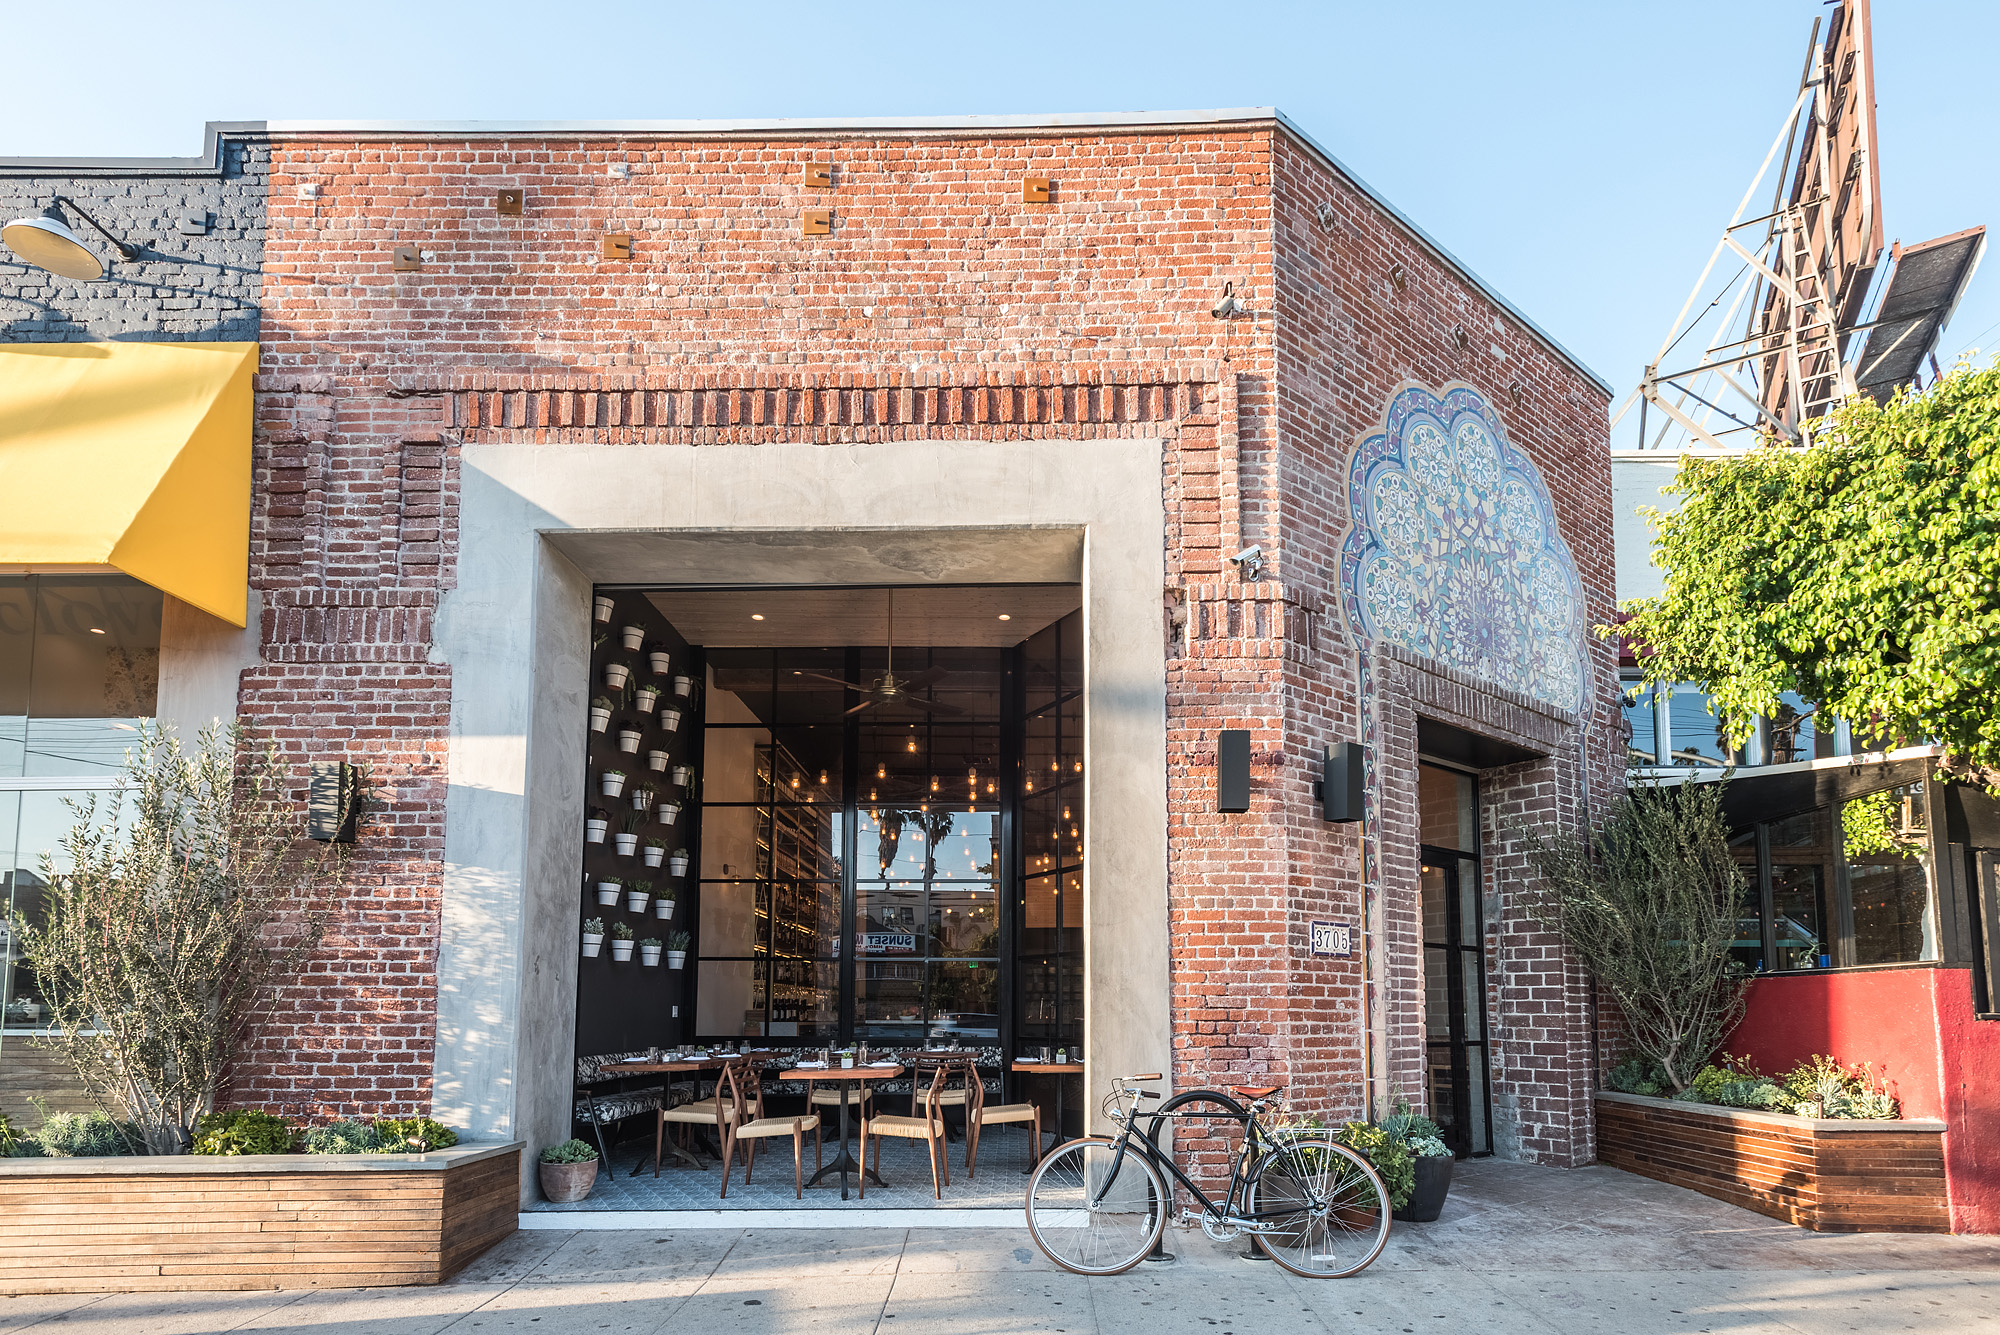 A sunny exterior for a restaurant in Silver Lake, with brick, a small front patio, and yellow awning.